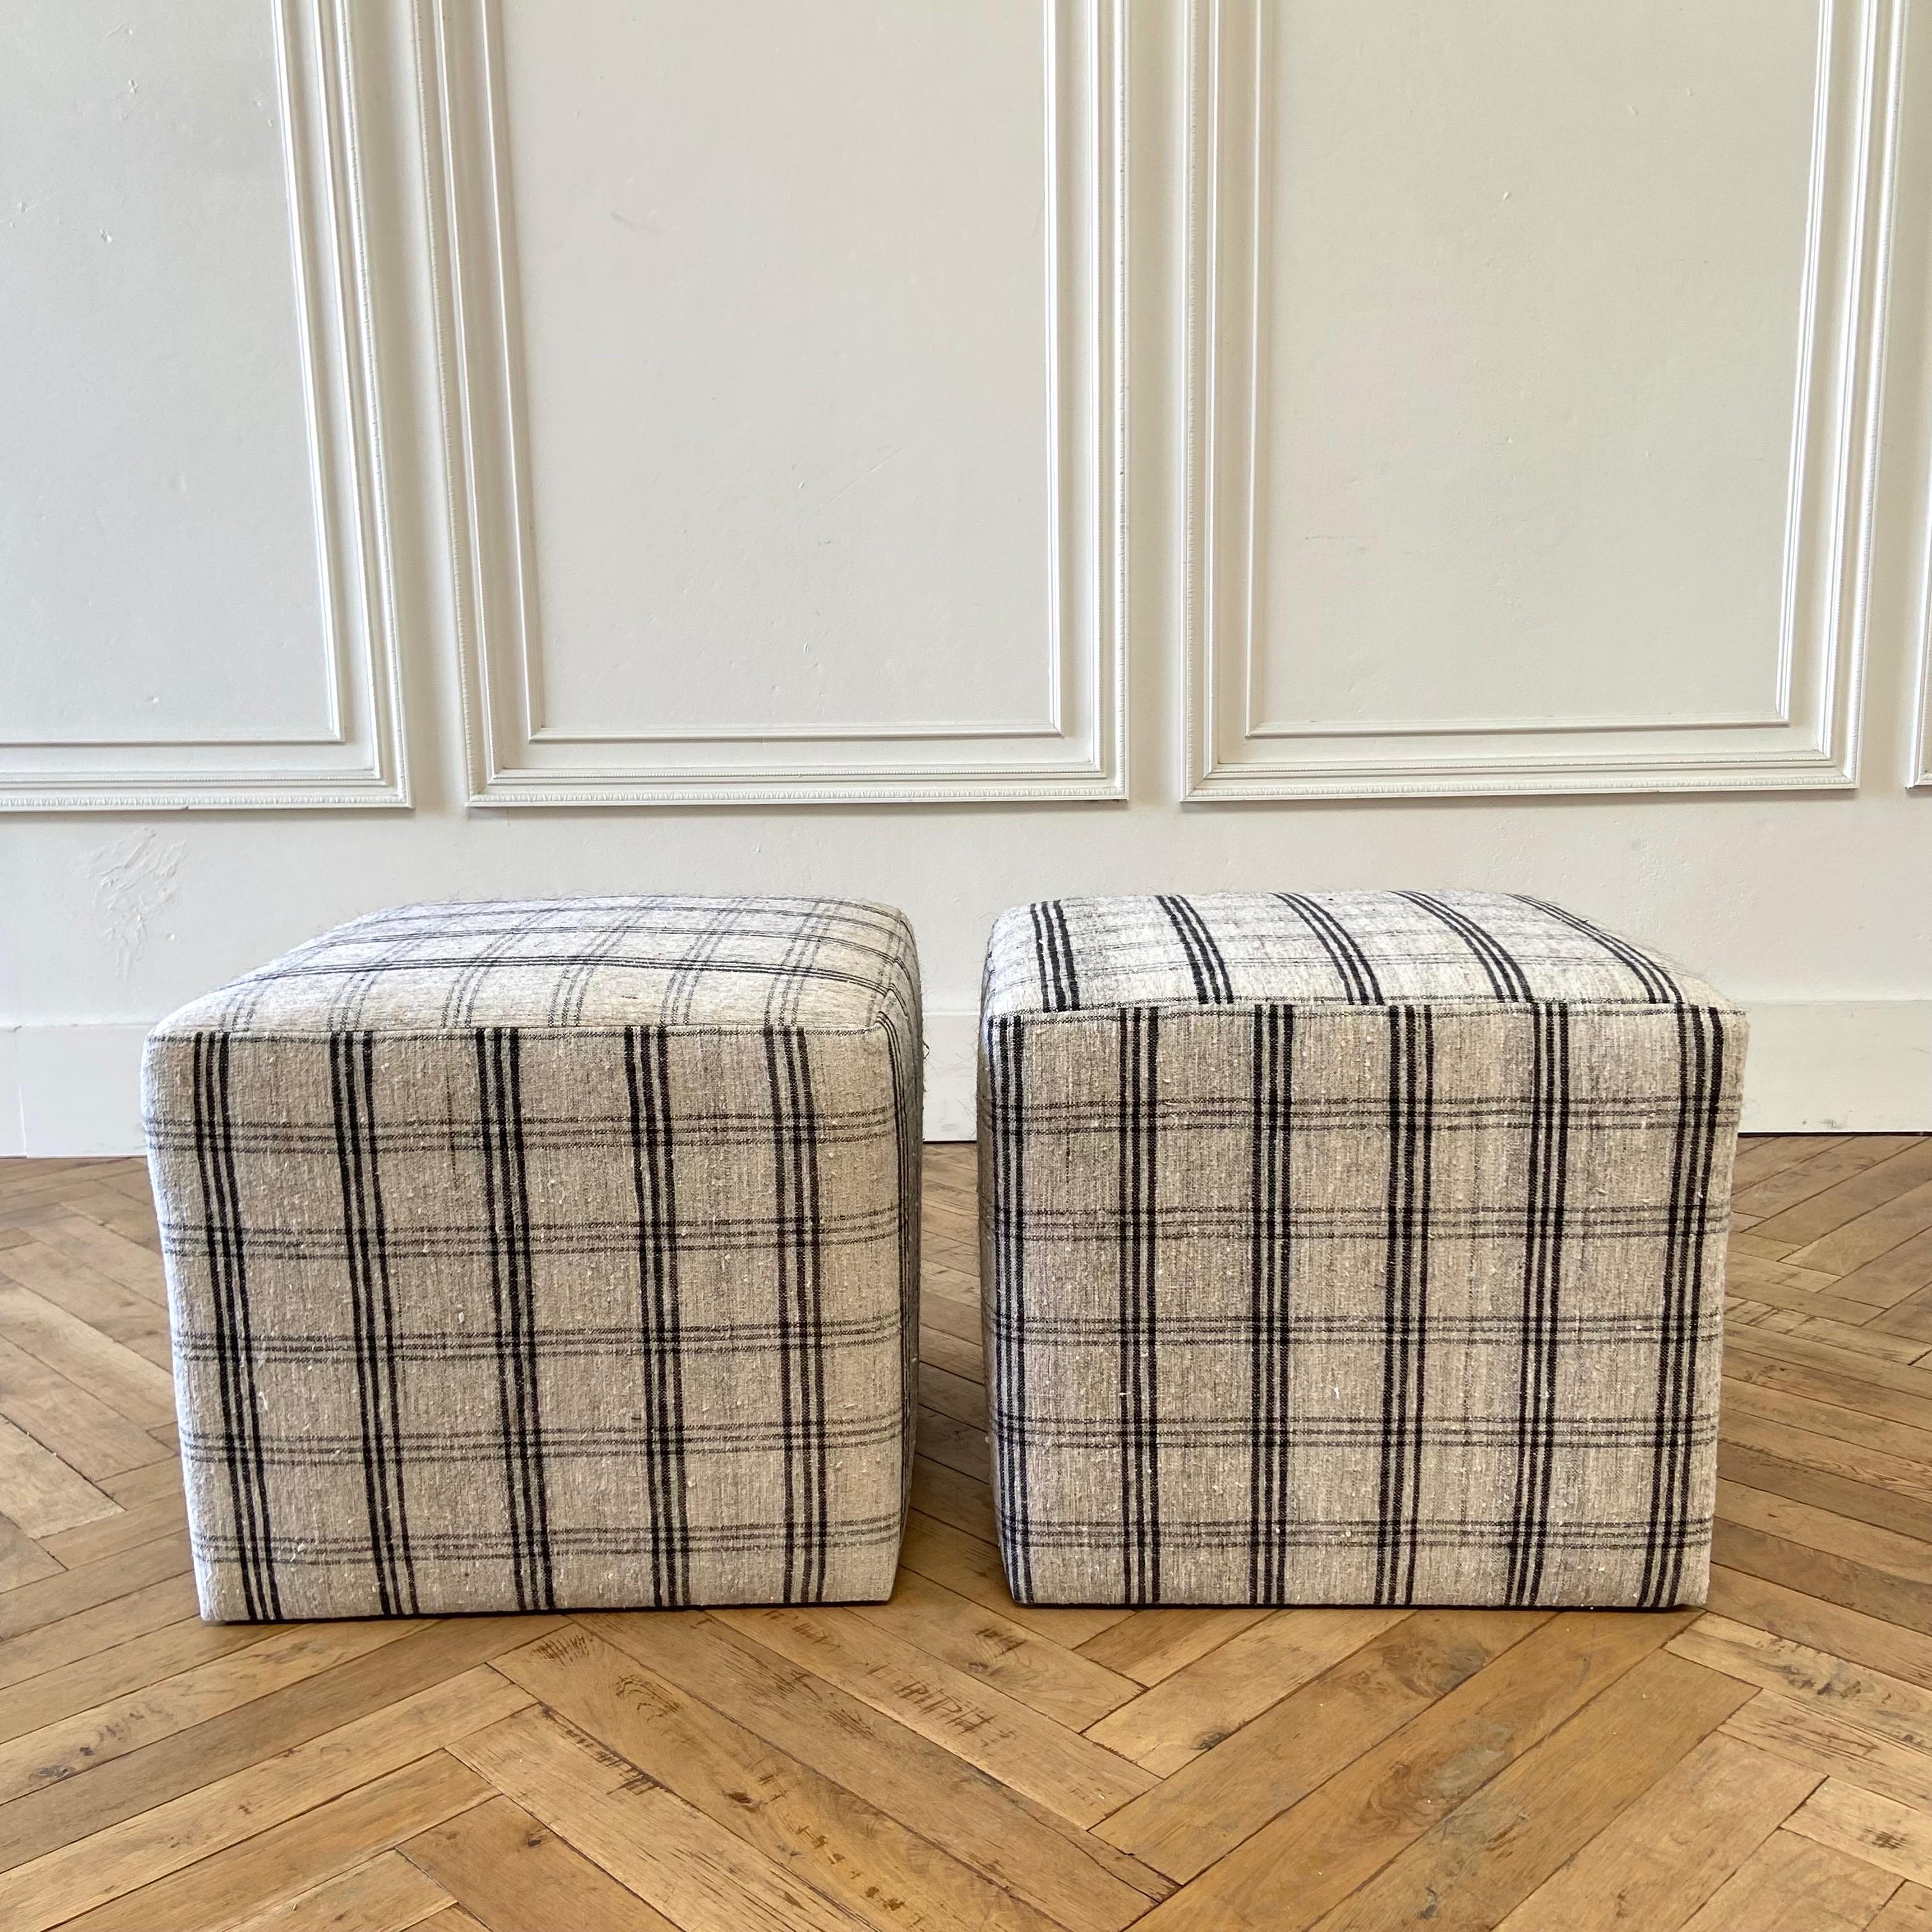 Vintage rug upholstered cube ottomans
Pair cube ottomans 21” x 21” x 18”h
constructed from a solid wood frame with foam top, upholstered in a vintage one of a kind rug. 
Colors: off white, grayish tone background with dark colored plaid pattern.